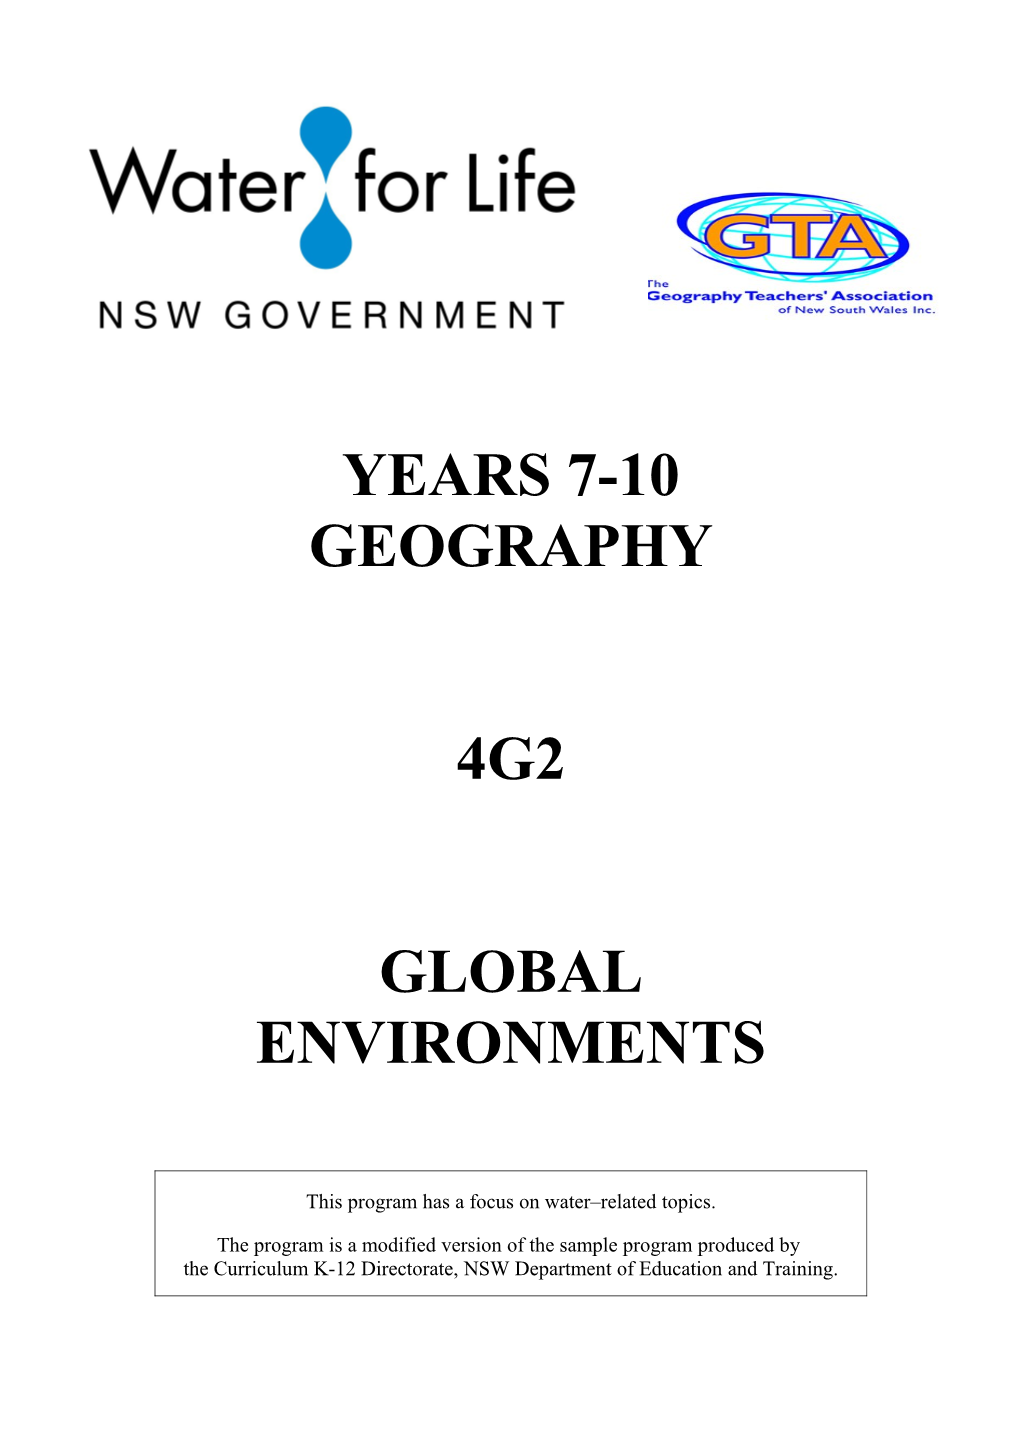 Years 7-10 Geography